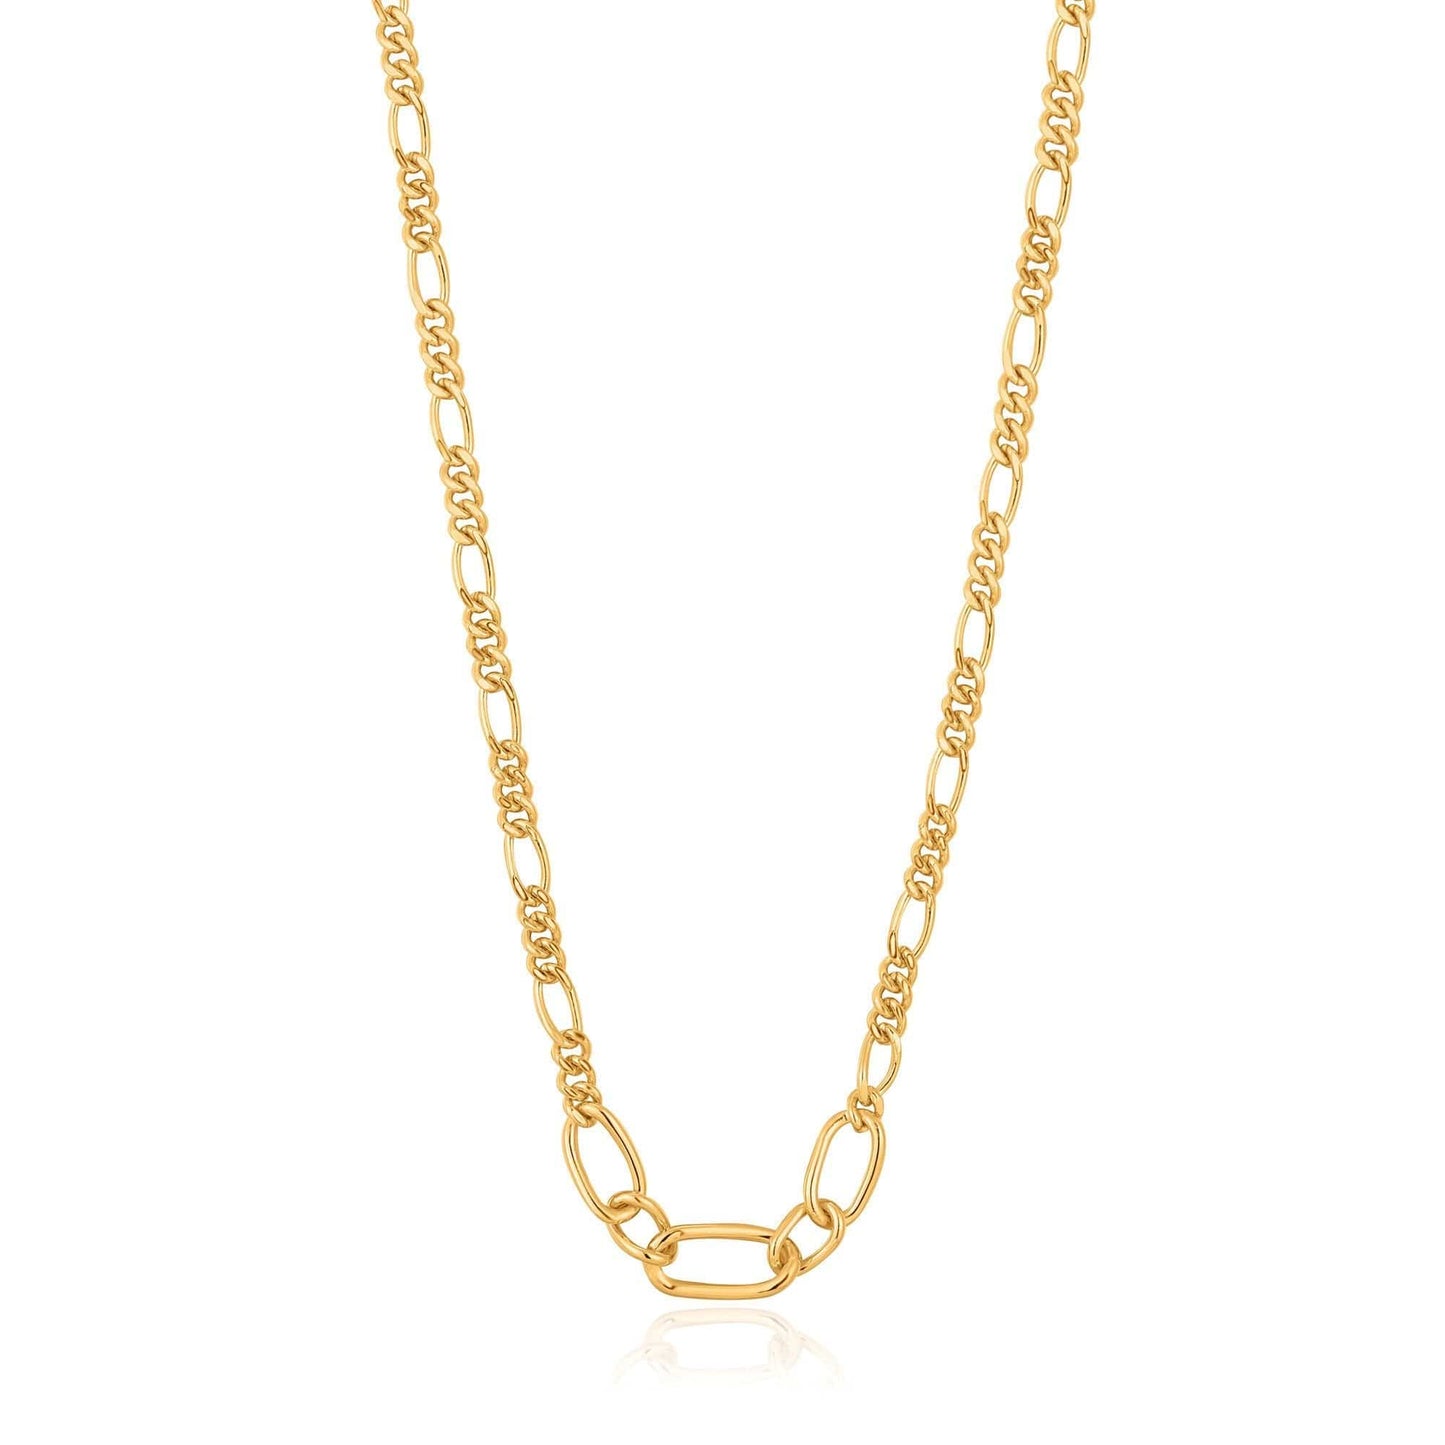 NKL-GPL Gold Figaro Chain Necklace